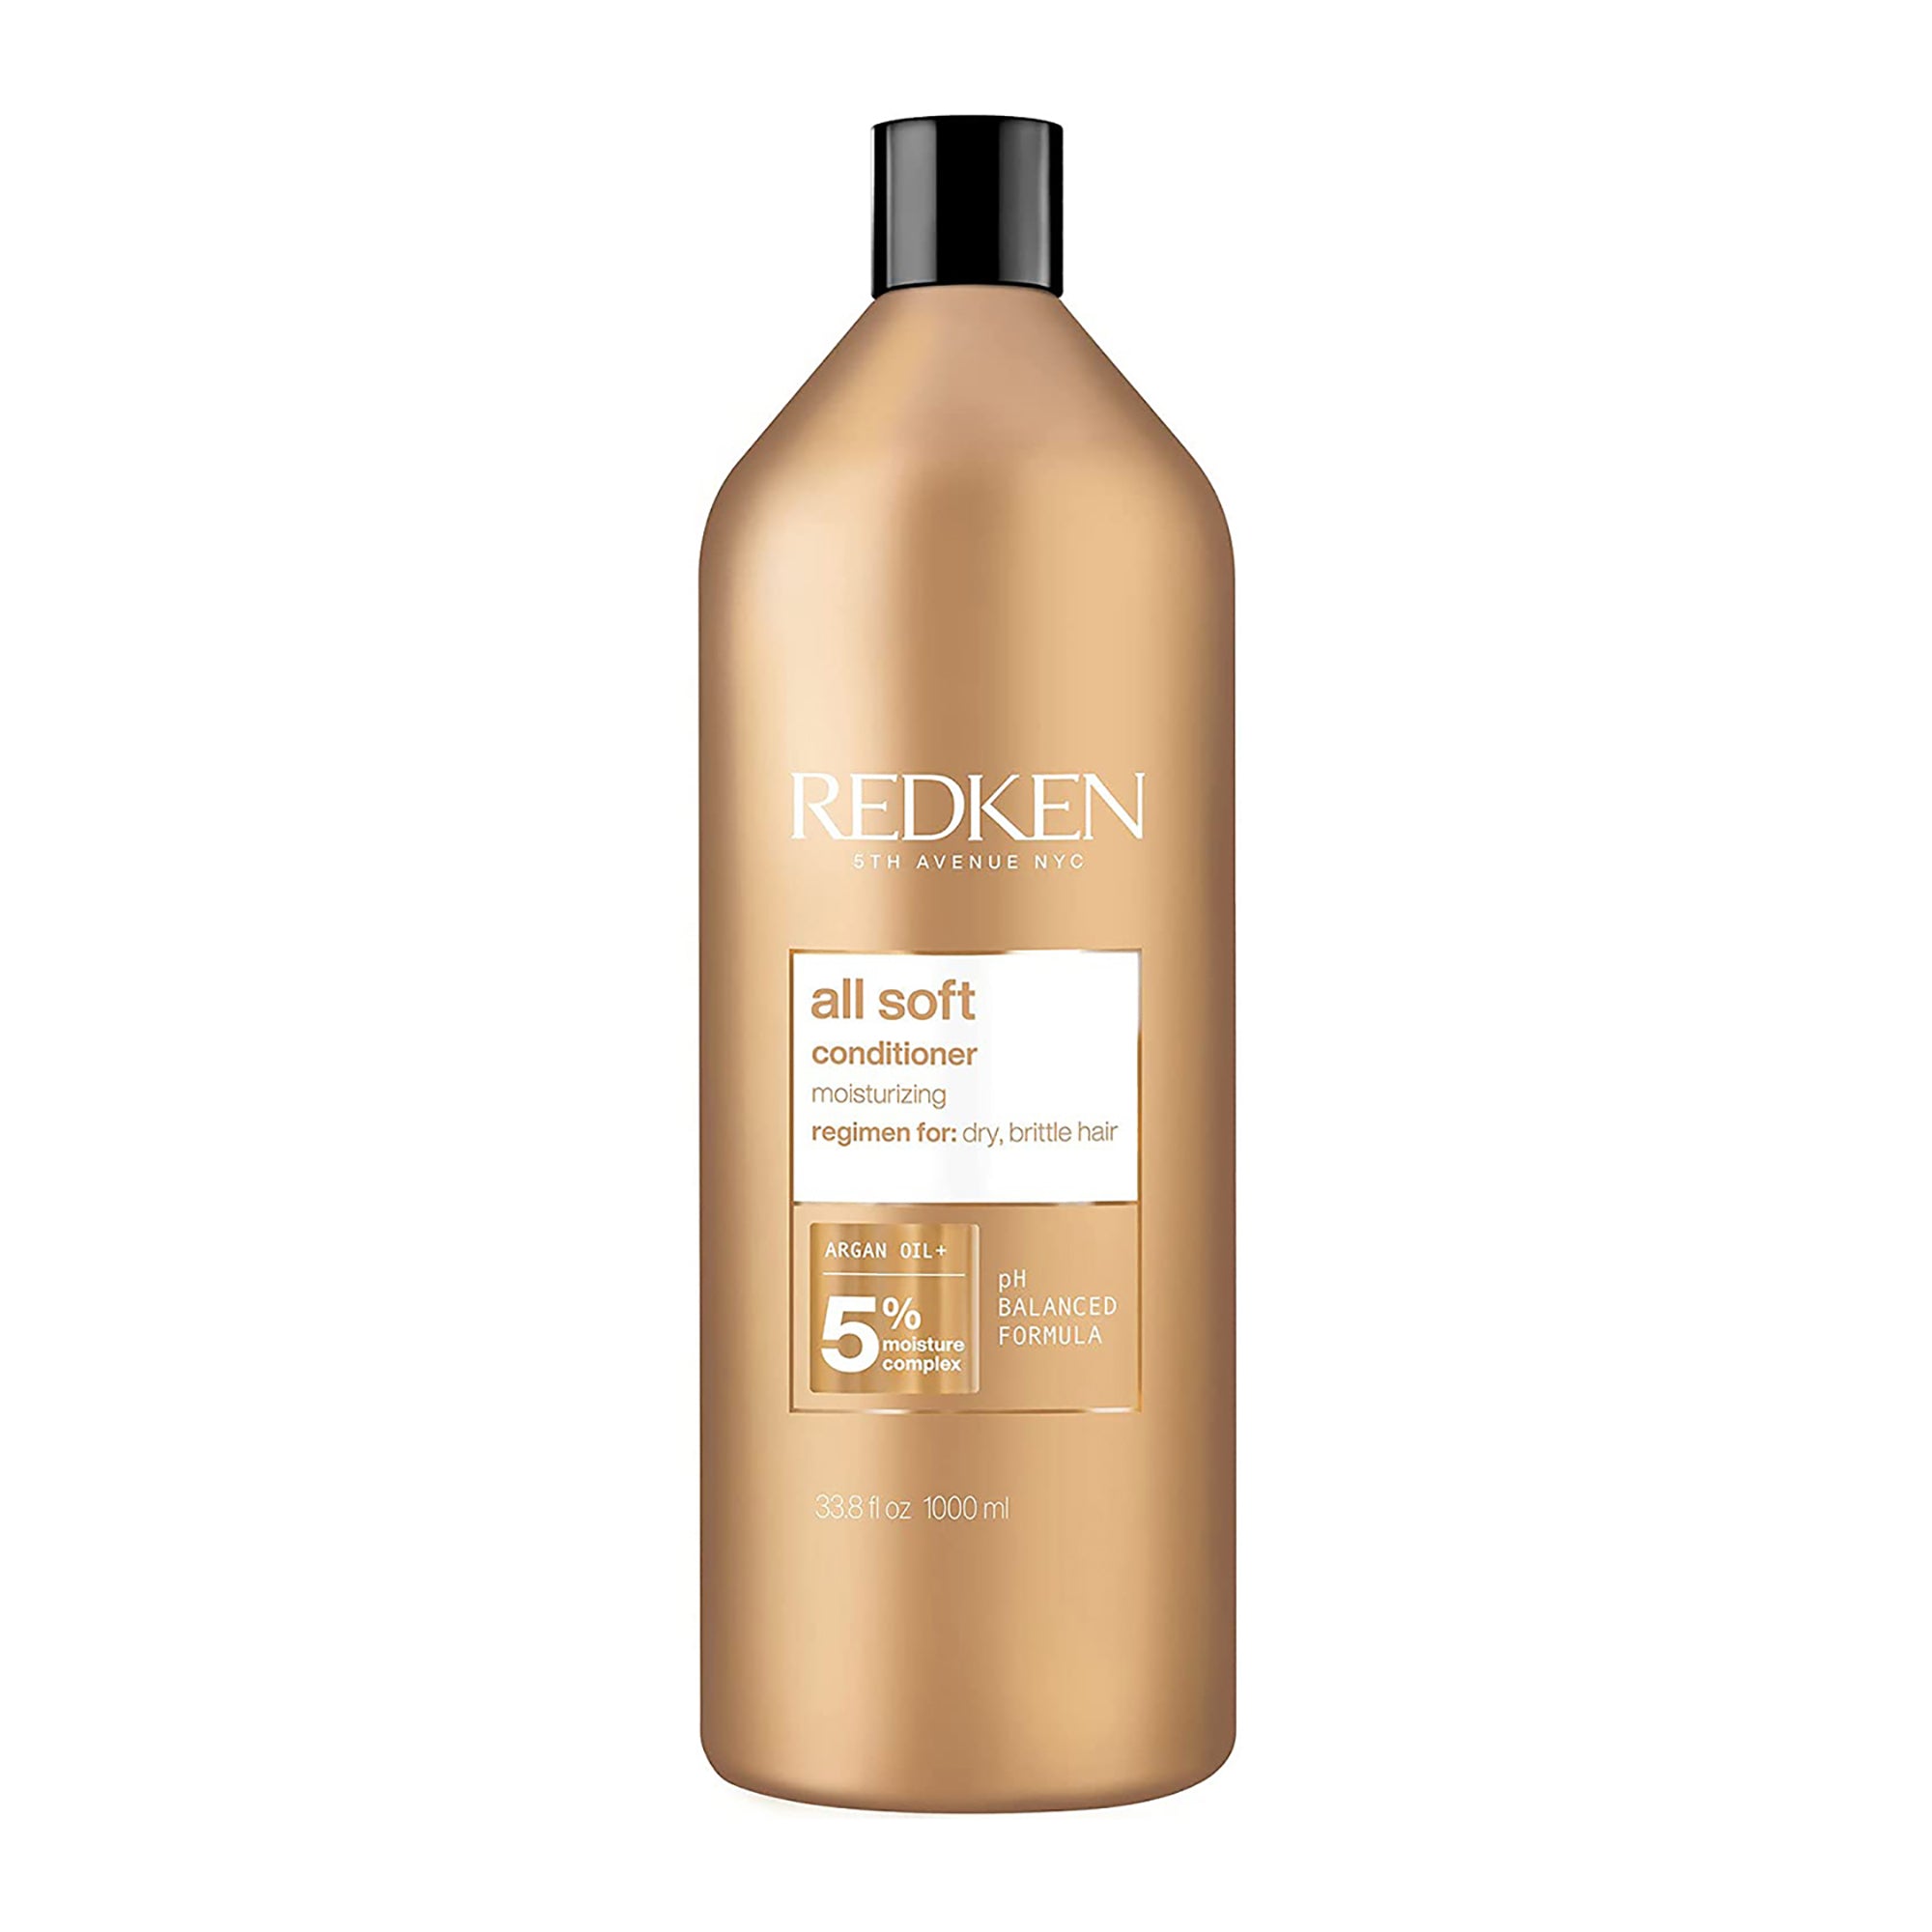 Redken All Soft Shampoo and Conditioner Liter ($104 Value) / DUO